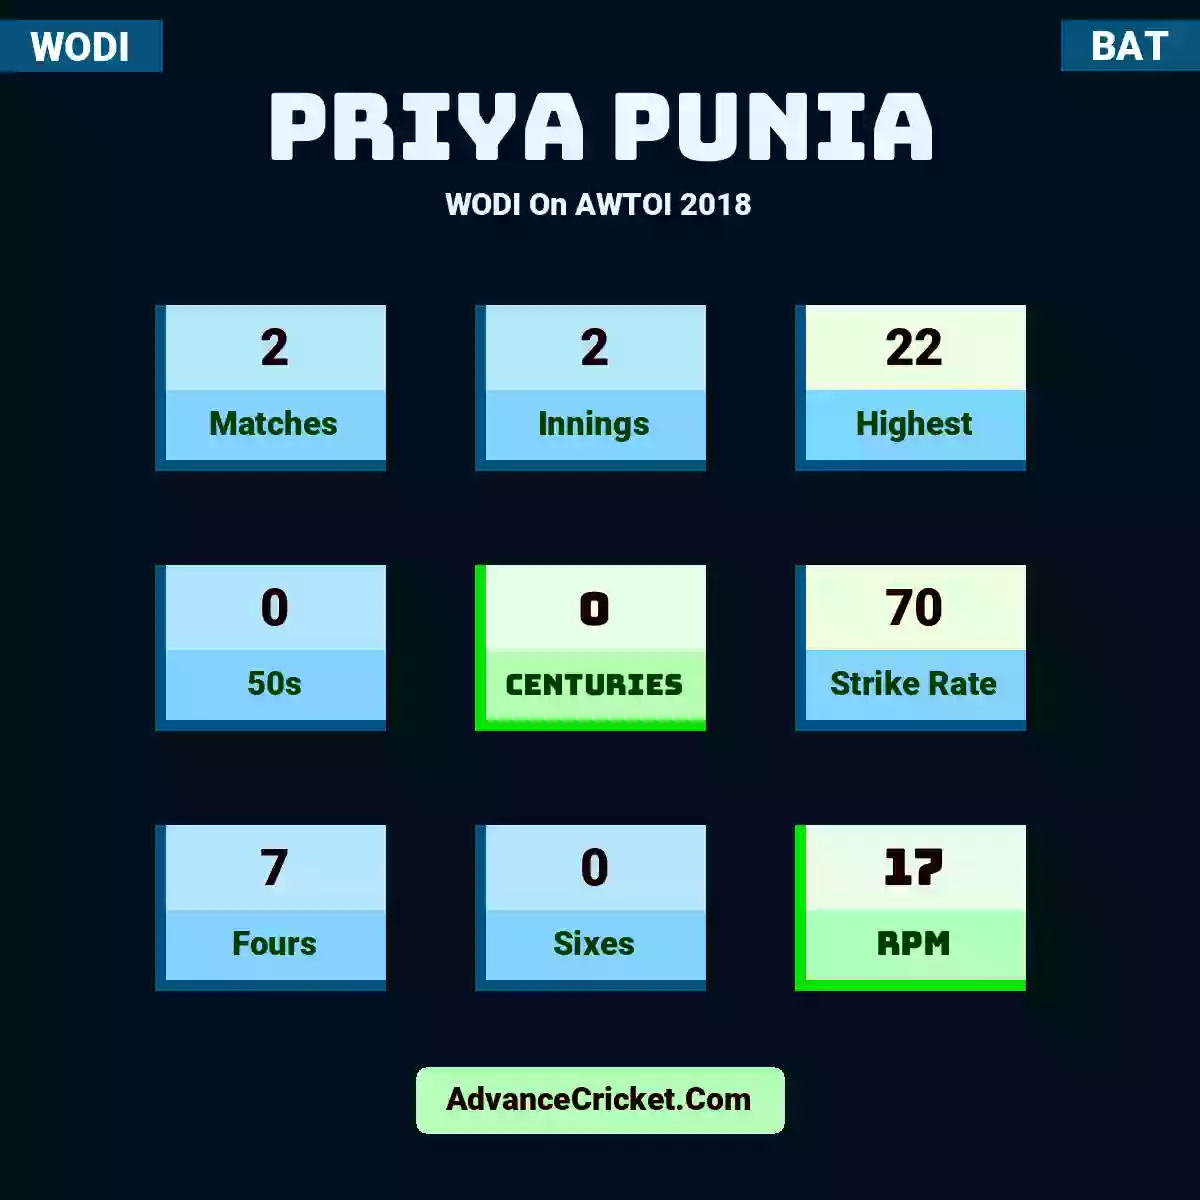 Priya Punia WODI  On AWTOI 2018, Priya Punia played 2 matches, scored 22 runs as highest, 0 half-centuries, and 0 centuries, with a strike rate of 70. P.Punia hit 7 fours and 0 sixes, with an RPM of 17.